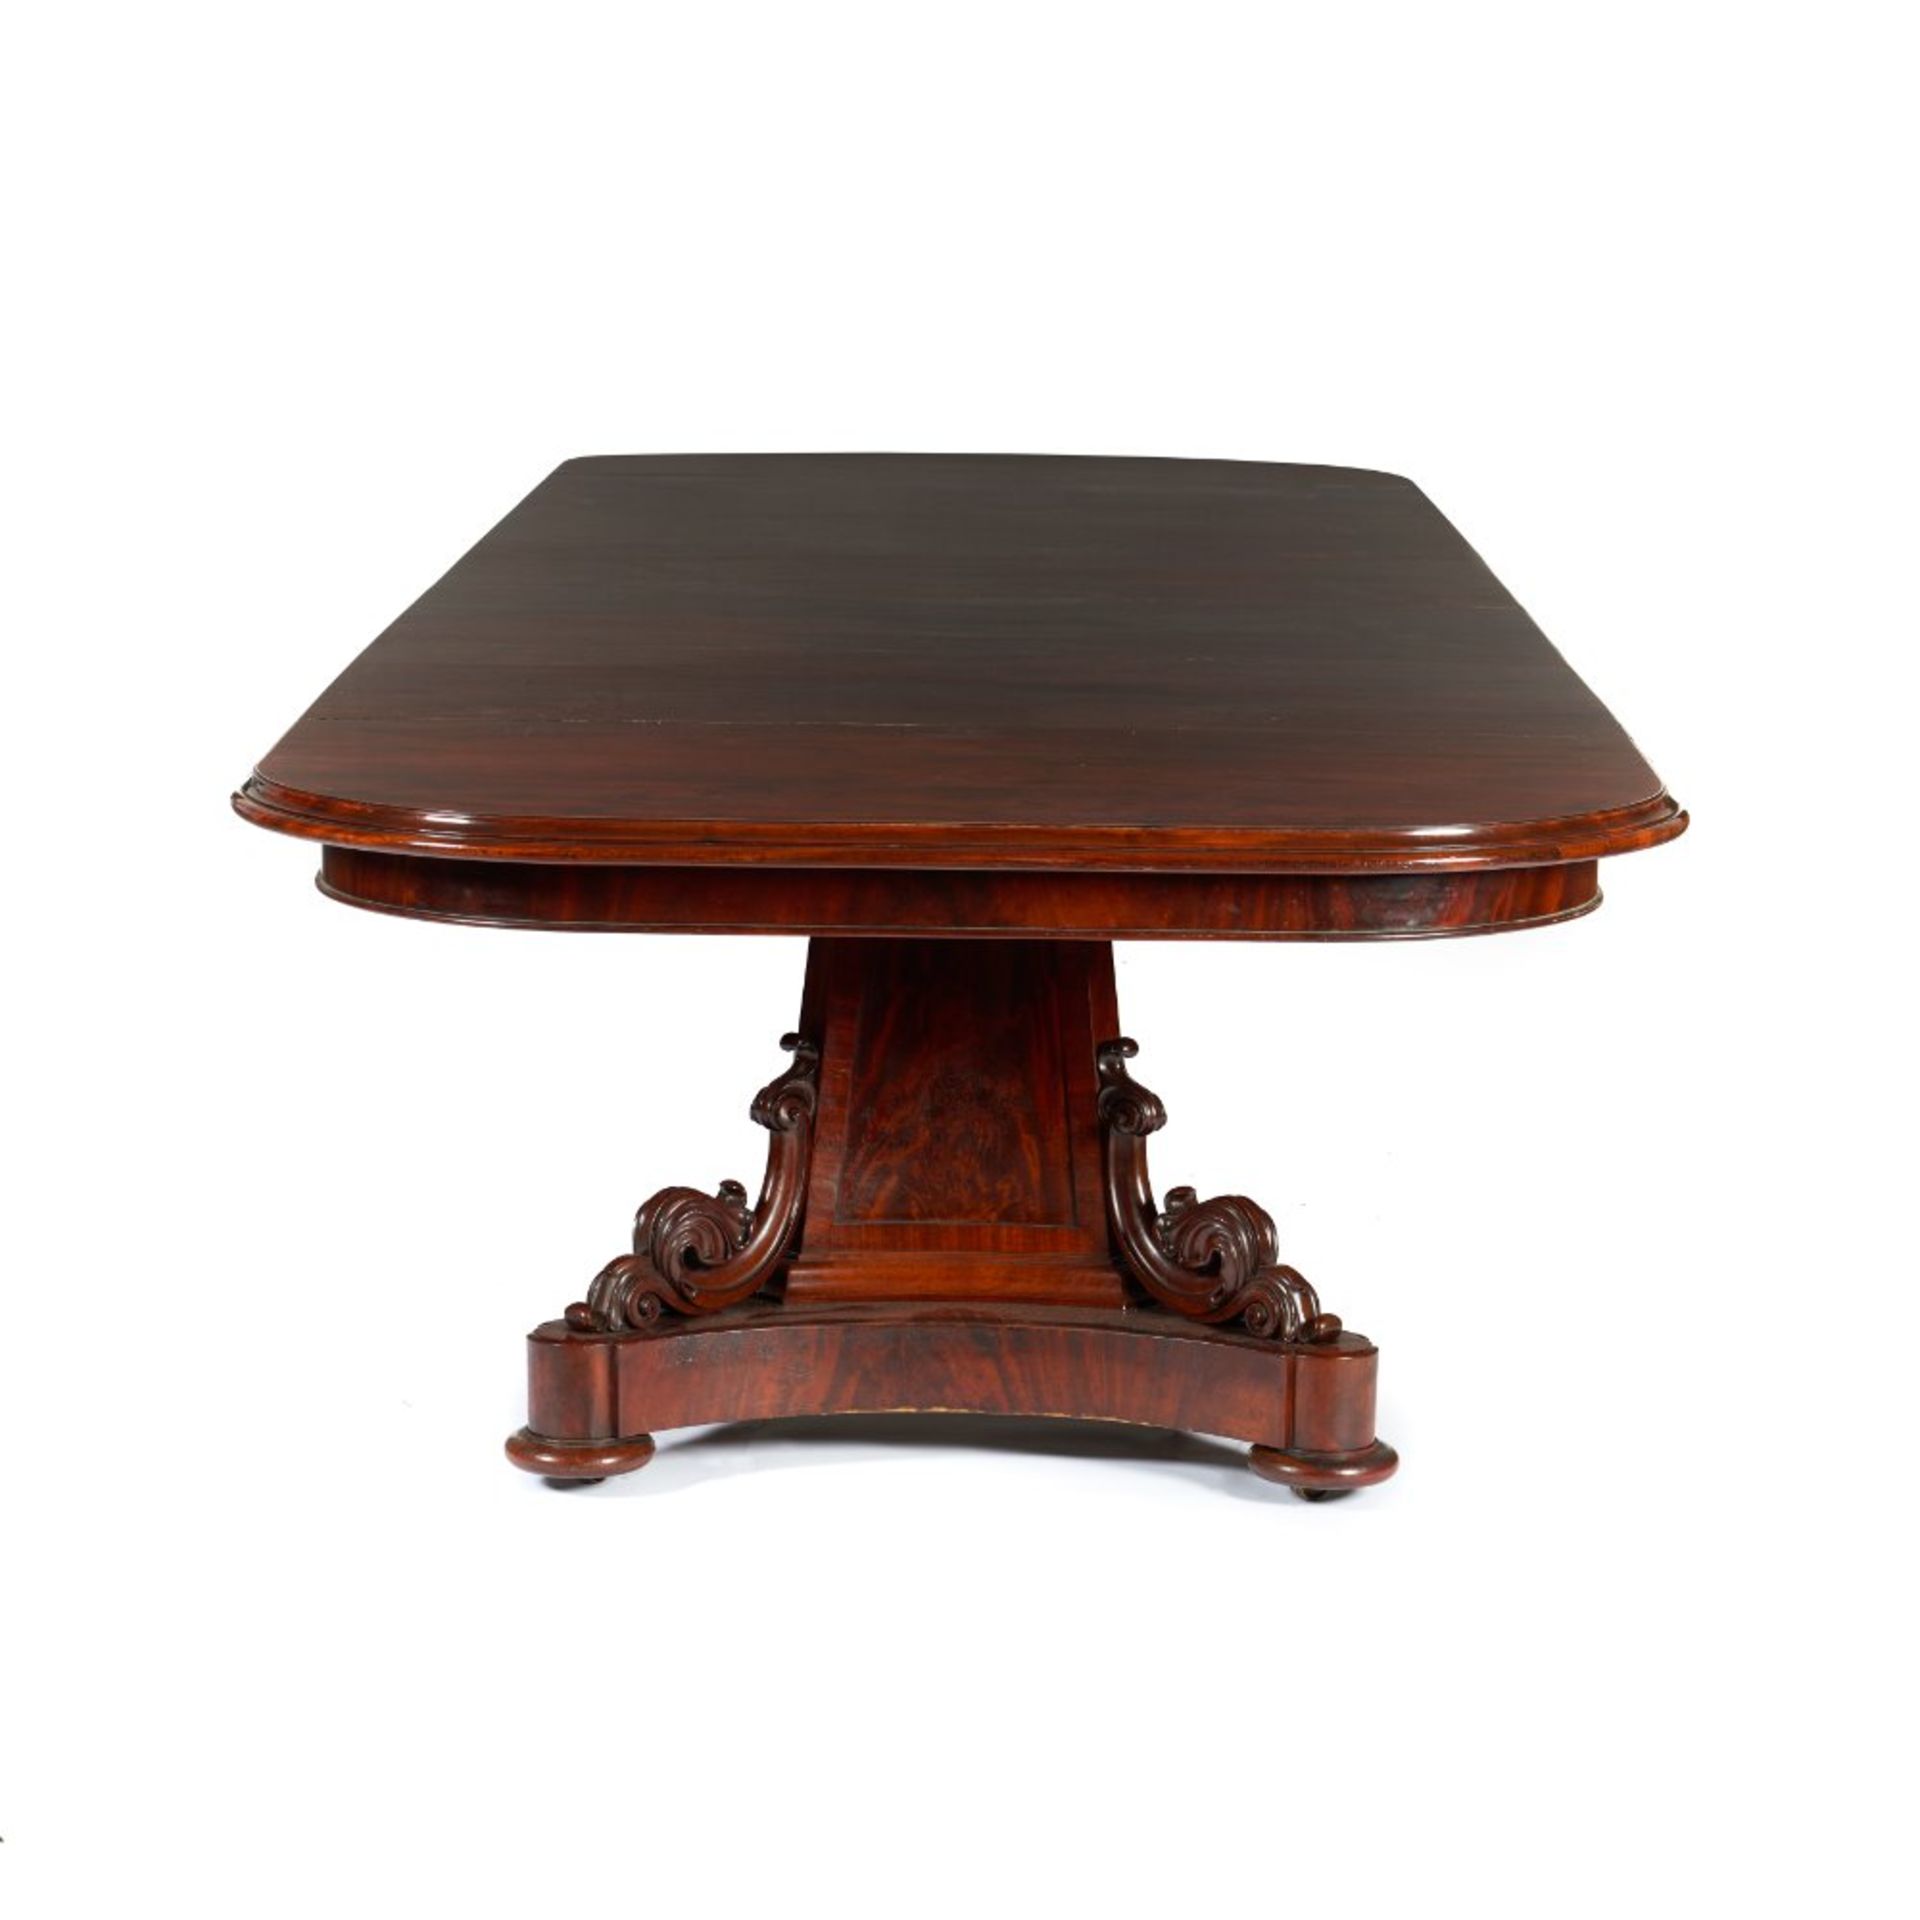 An William IV Dining Table - Image 2 of 6